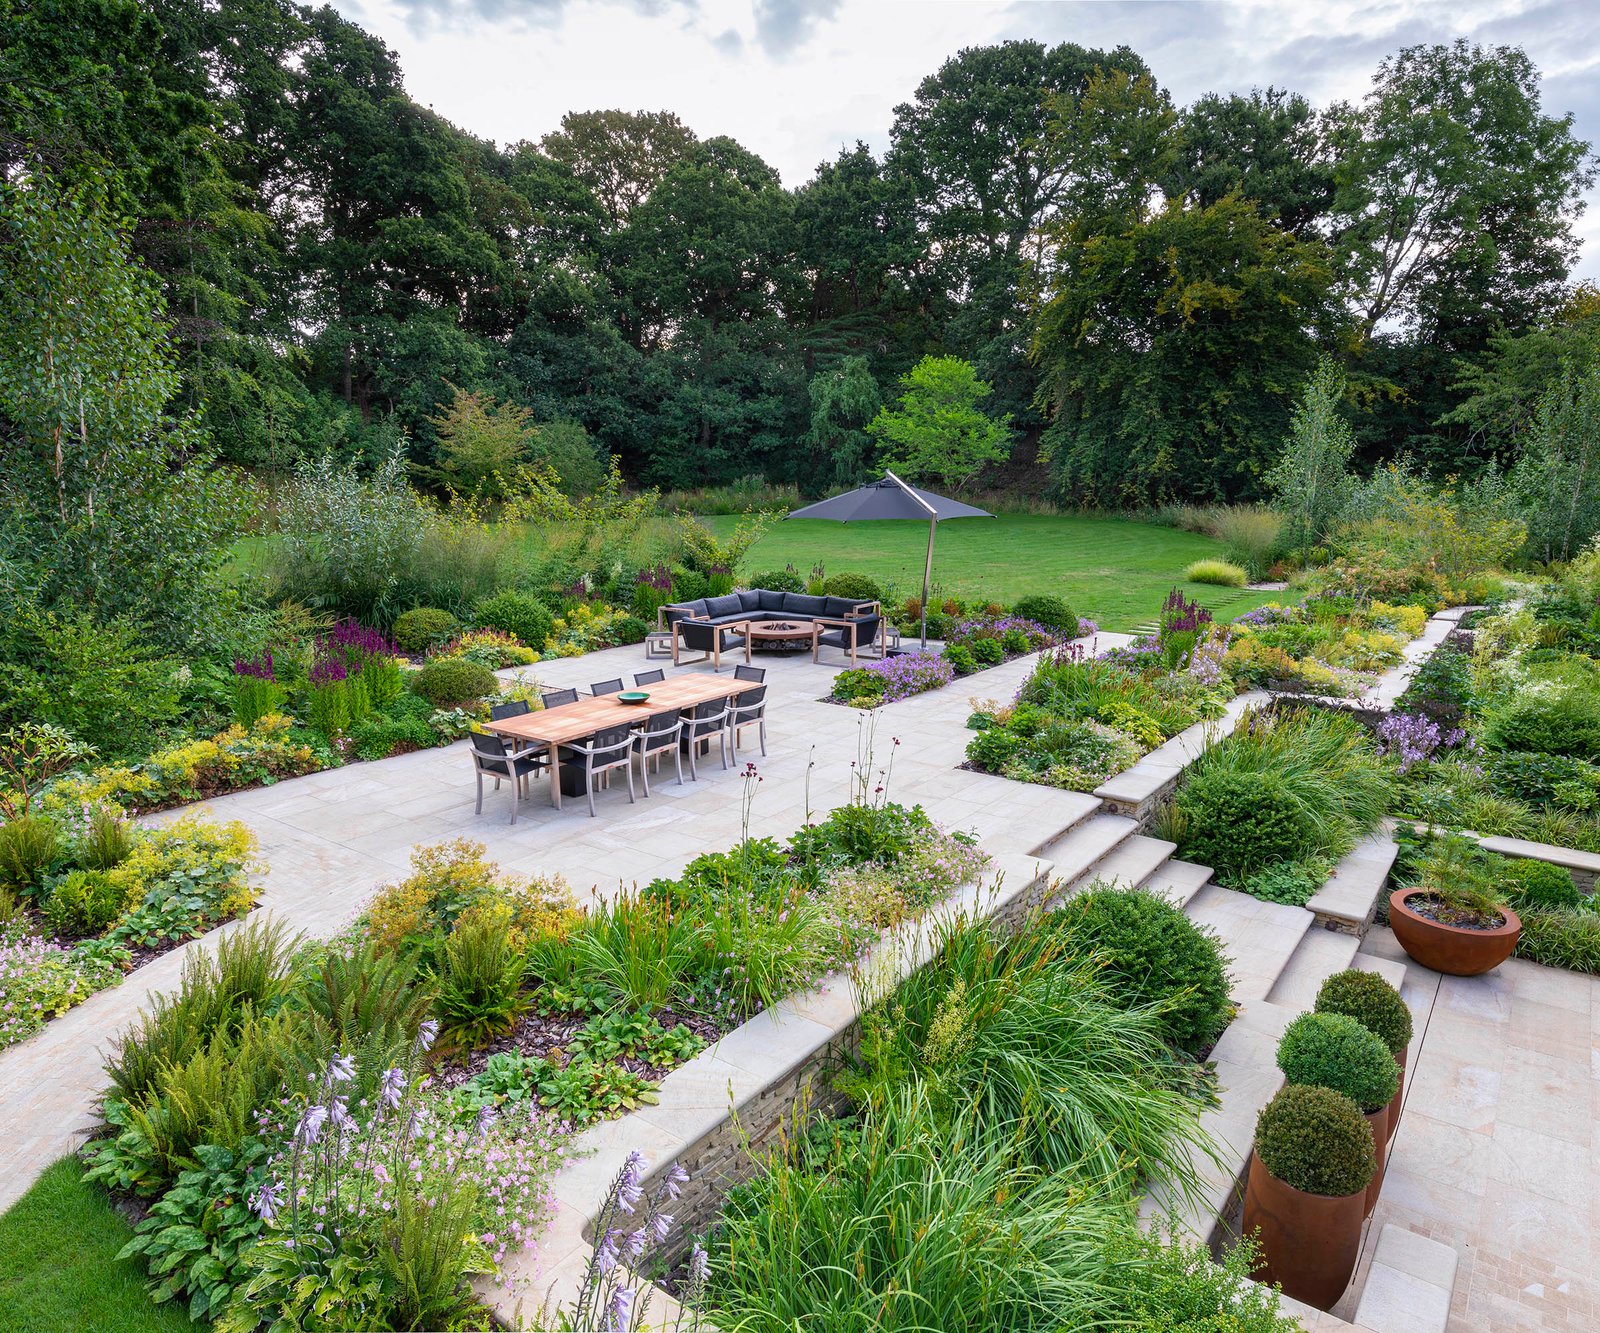 A beautifully landscaped garden with tiered planting beds and seating area